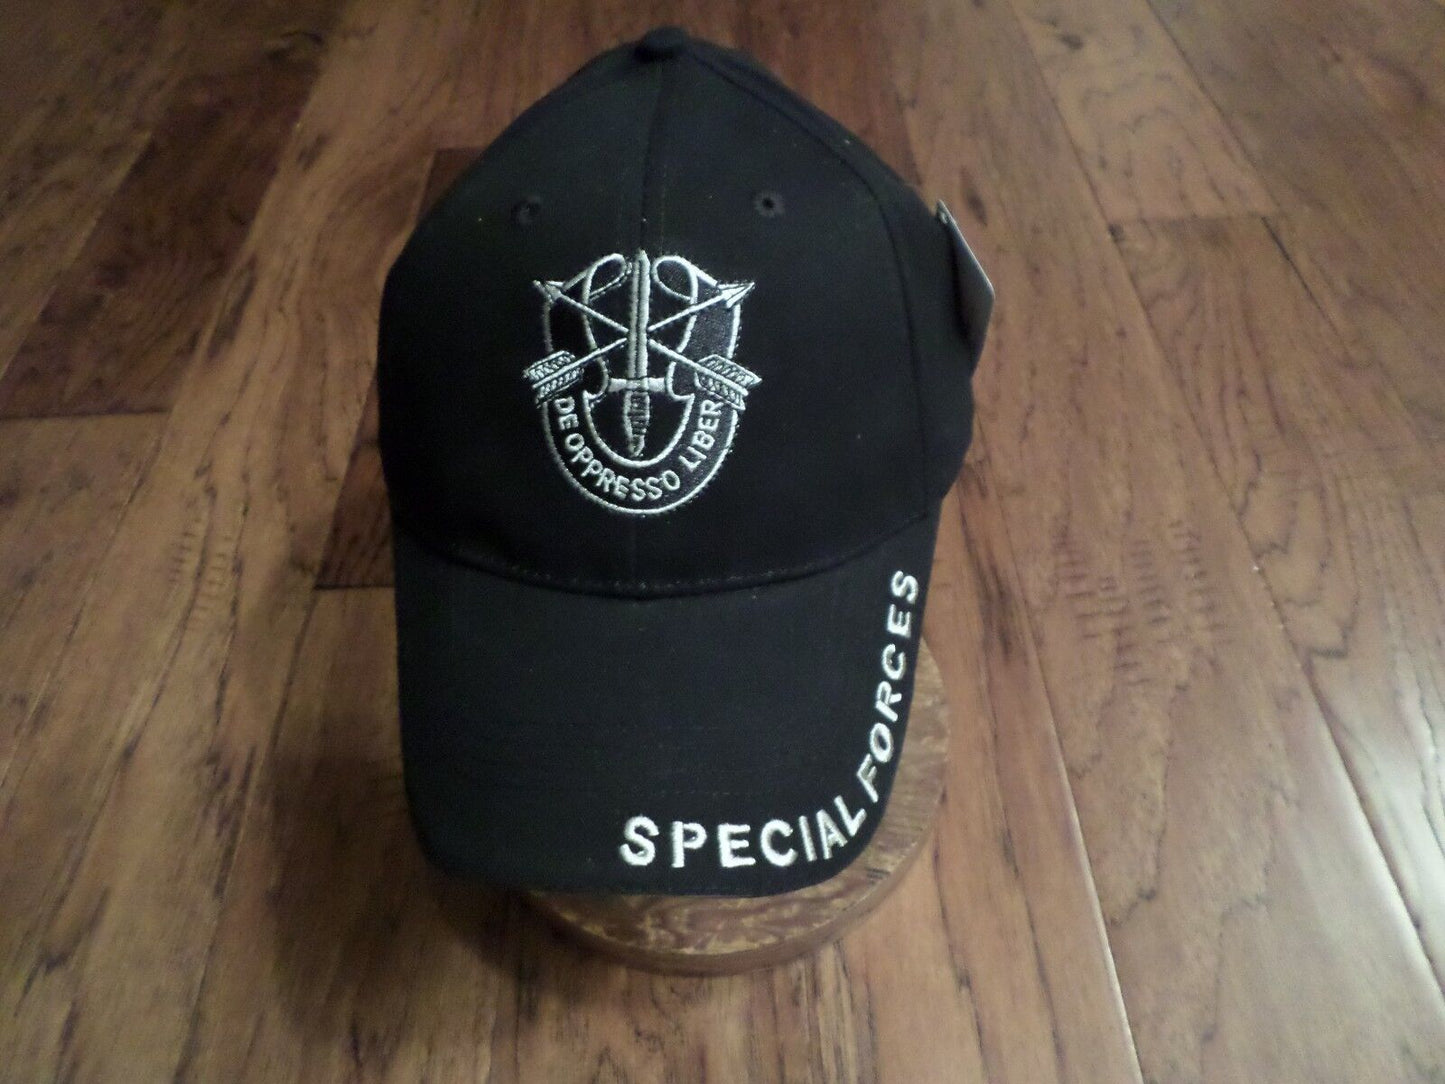 U.S. MILITARY ARMY SPECIAL FORCES HAT EMBROIDERED MILITARY BALL CAP